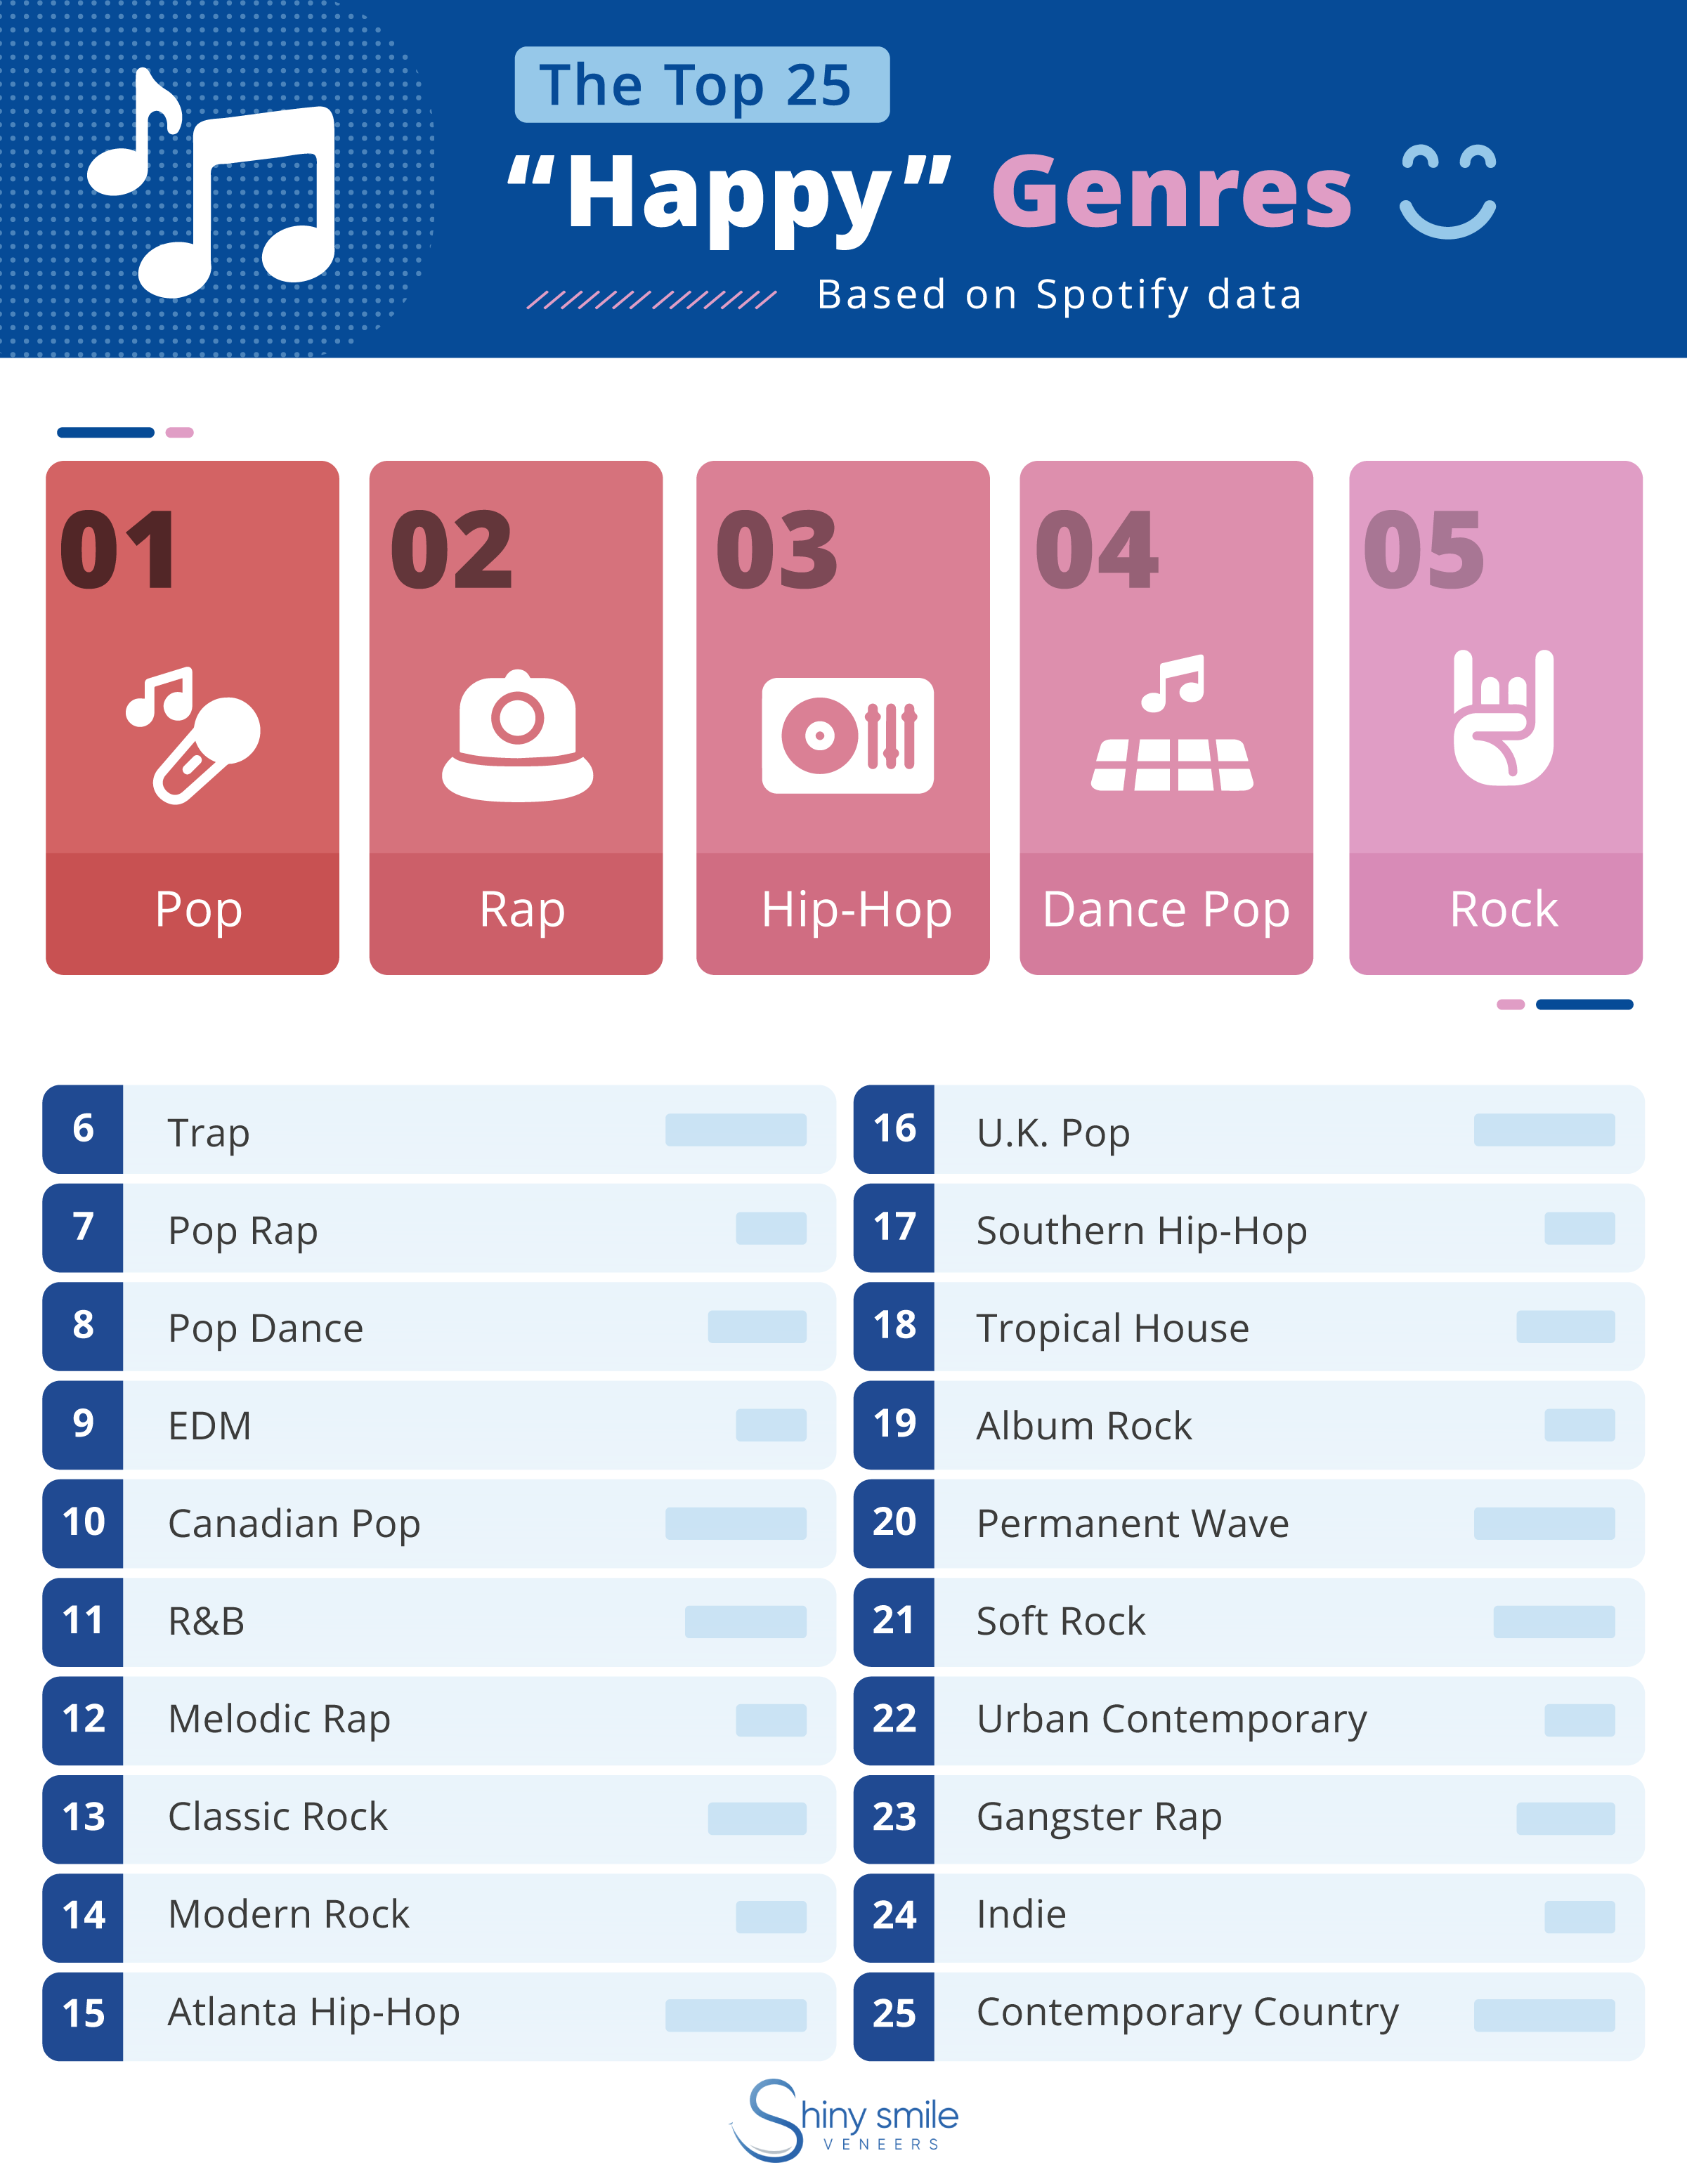 the 25 happiest genres based on Spotify analysis